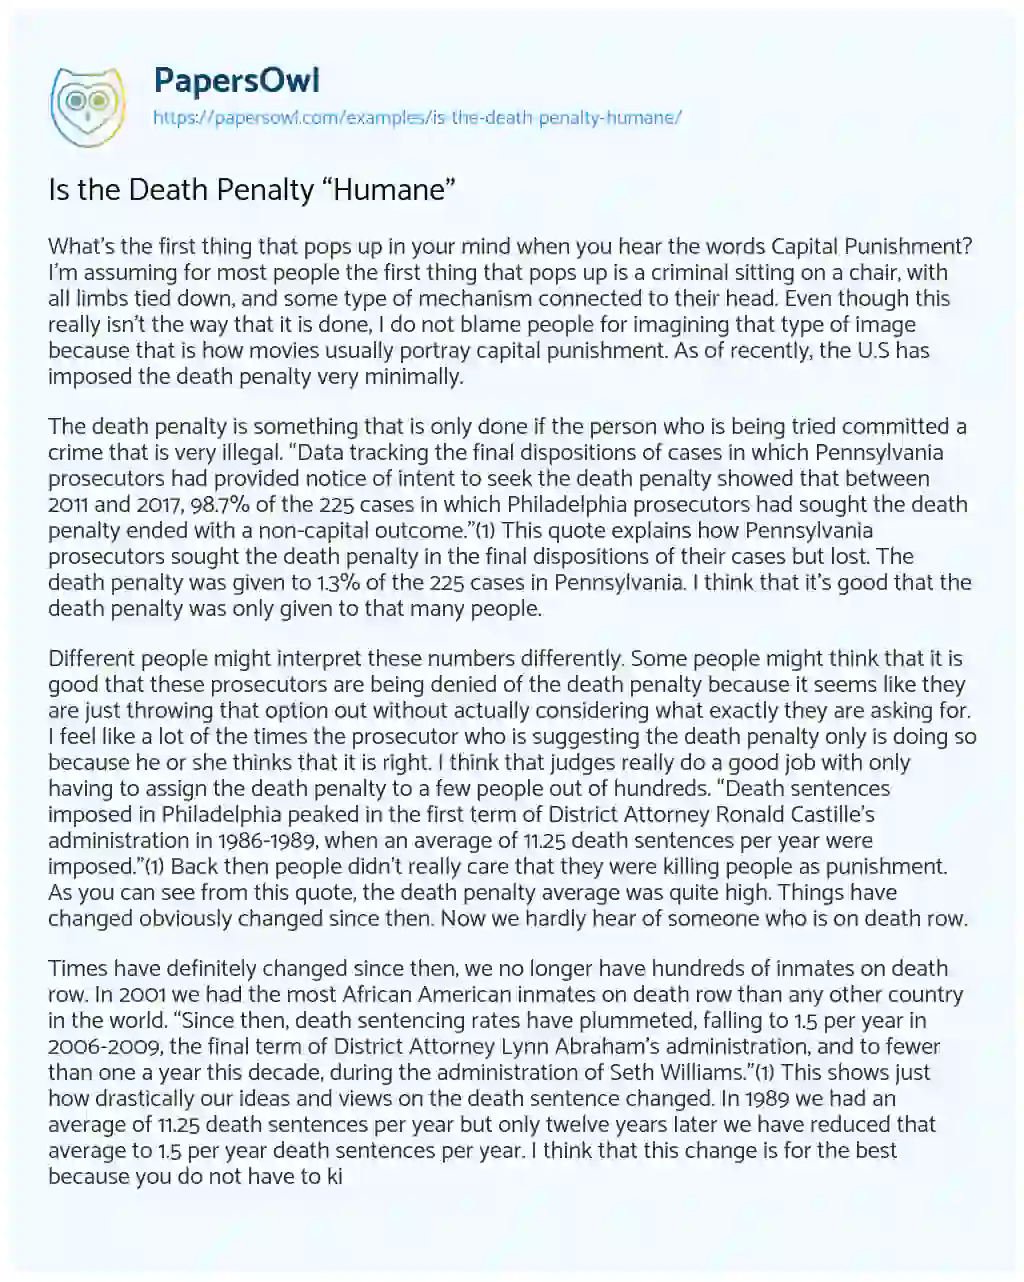 Essay on Is the Death Penalty “Humane”